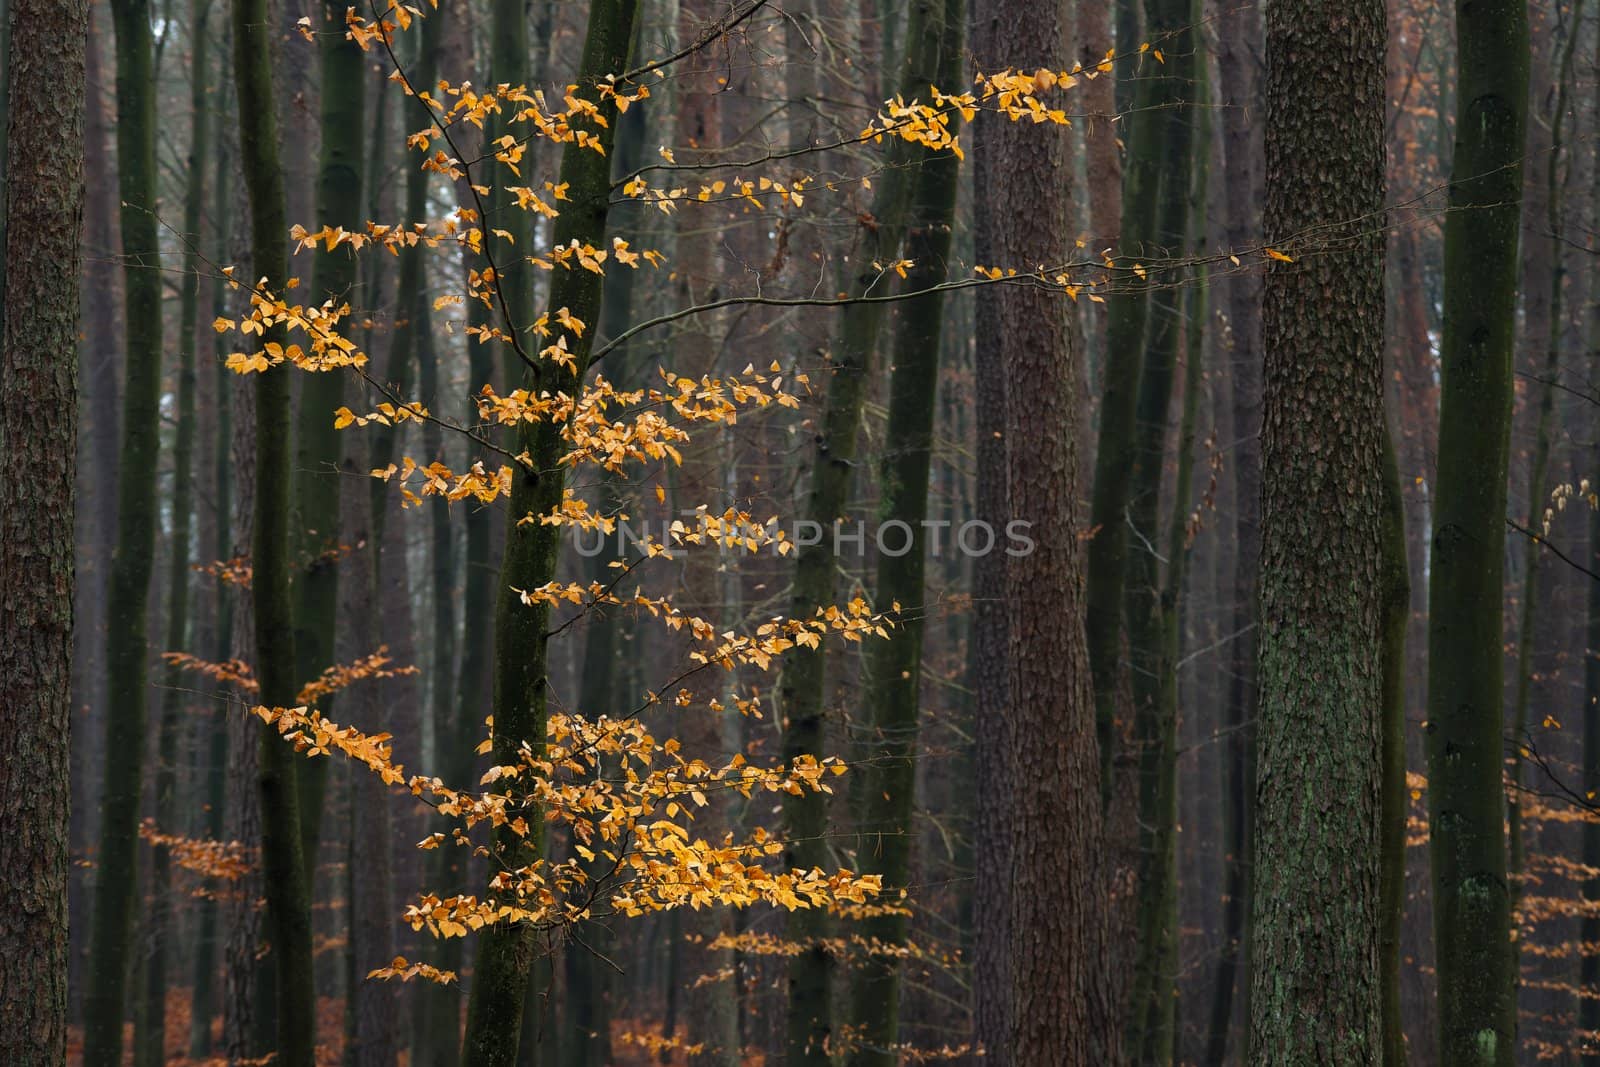 Hornbeam tree with golden autumn leaves in the forest.